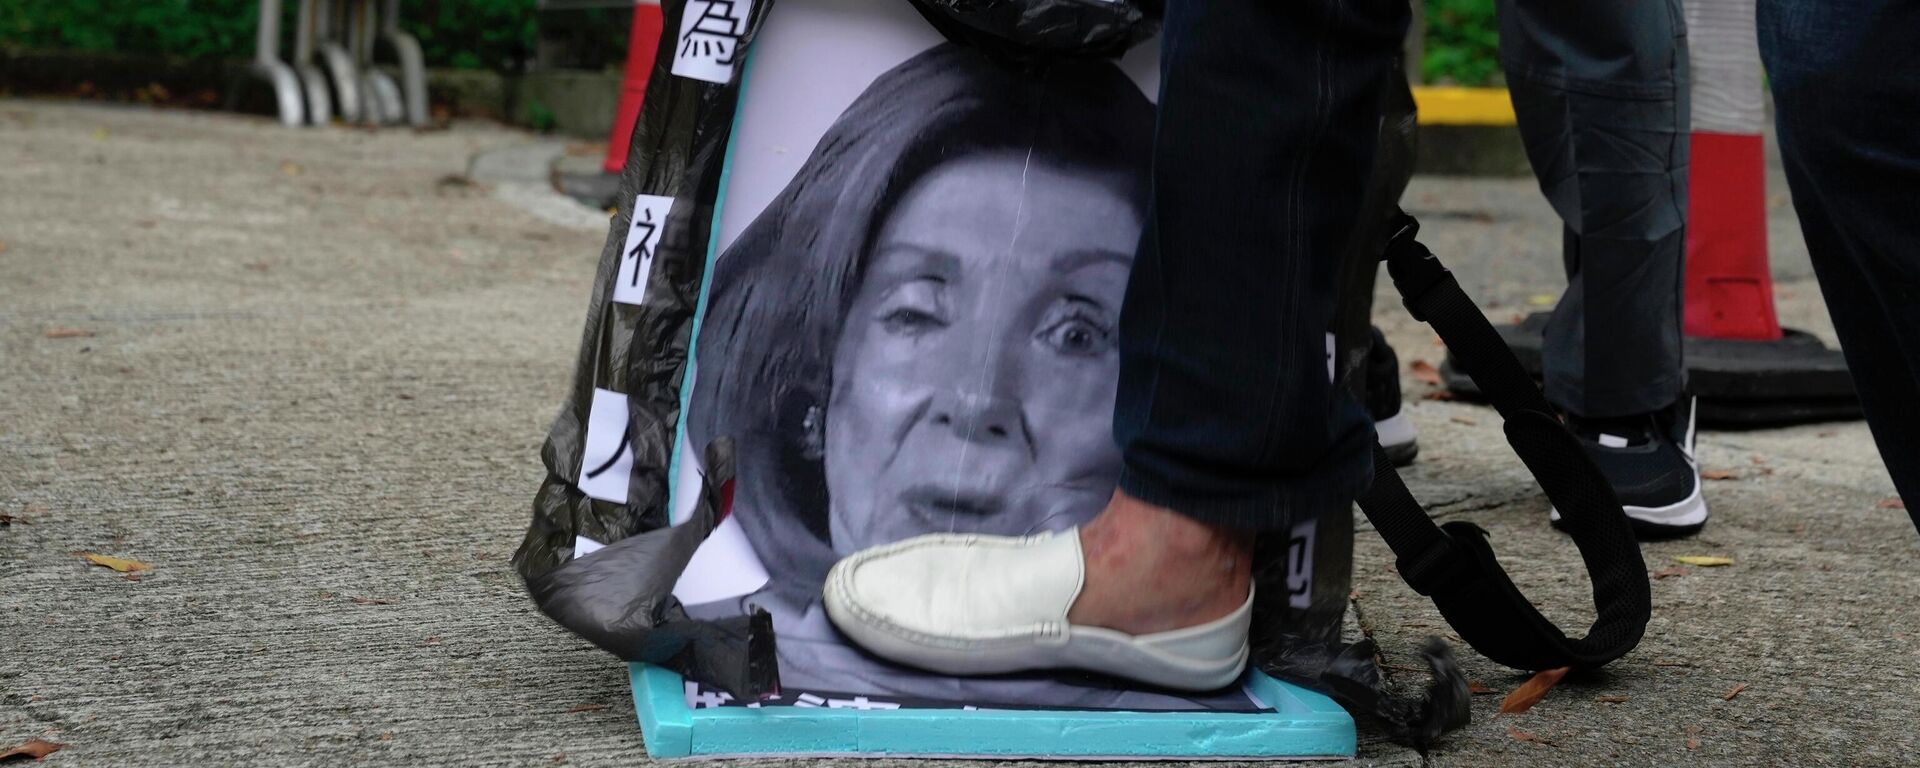 Pro-China supporters step on a picture of U.S. House Speaker Nancy Pelosi during a protest outside the Consulate General of the United States in Hong Kong, Wednesday, Aug. 3, 2022. U.S. House Speaker Nancy Pelosi arrived in Taiwan late Tuesday, becoming the highest-ranking American official in 25 years to visit the self-ruled island claimed by China, which quickly announced that it would conduct military maneuvers in retaliation for her presence. (AP Photo/Kin Cheung) - Sputnik International, 1920, 13.08.2022